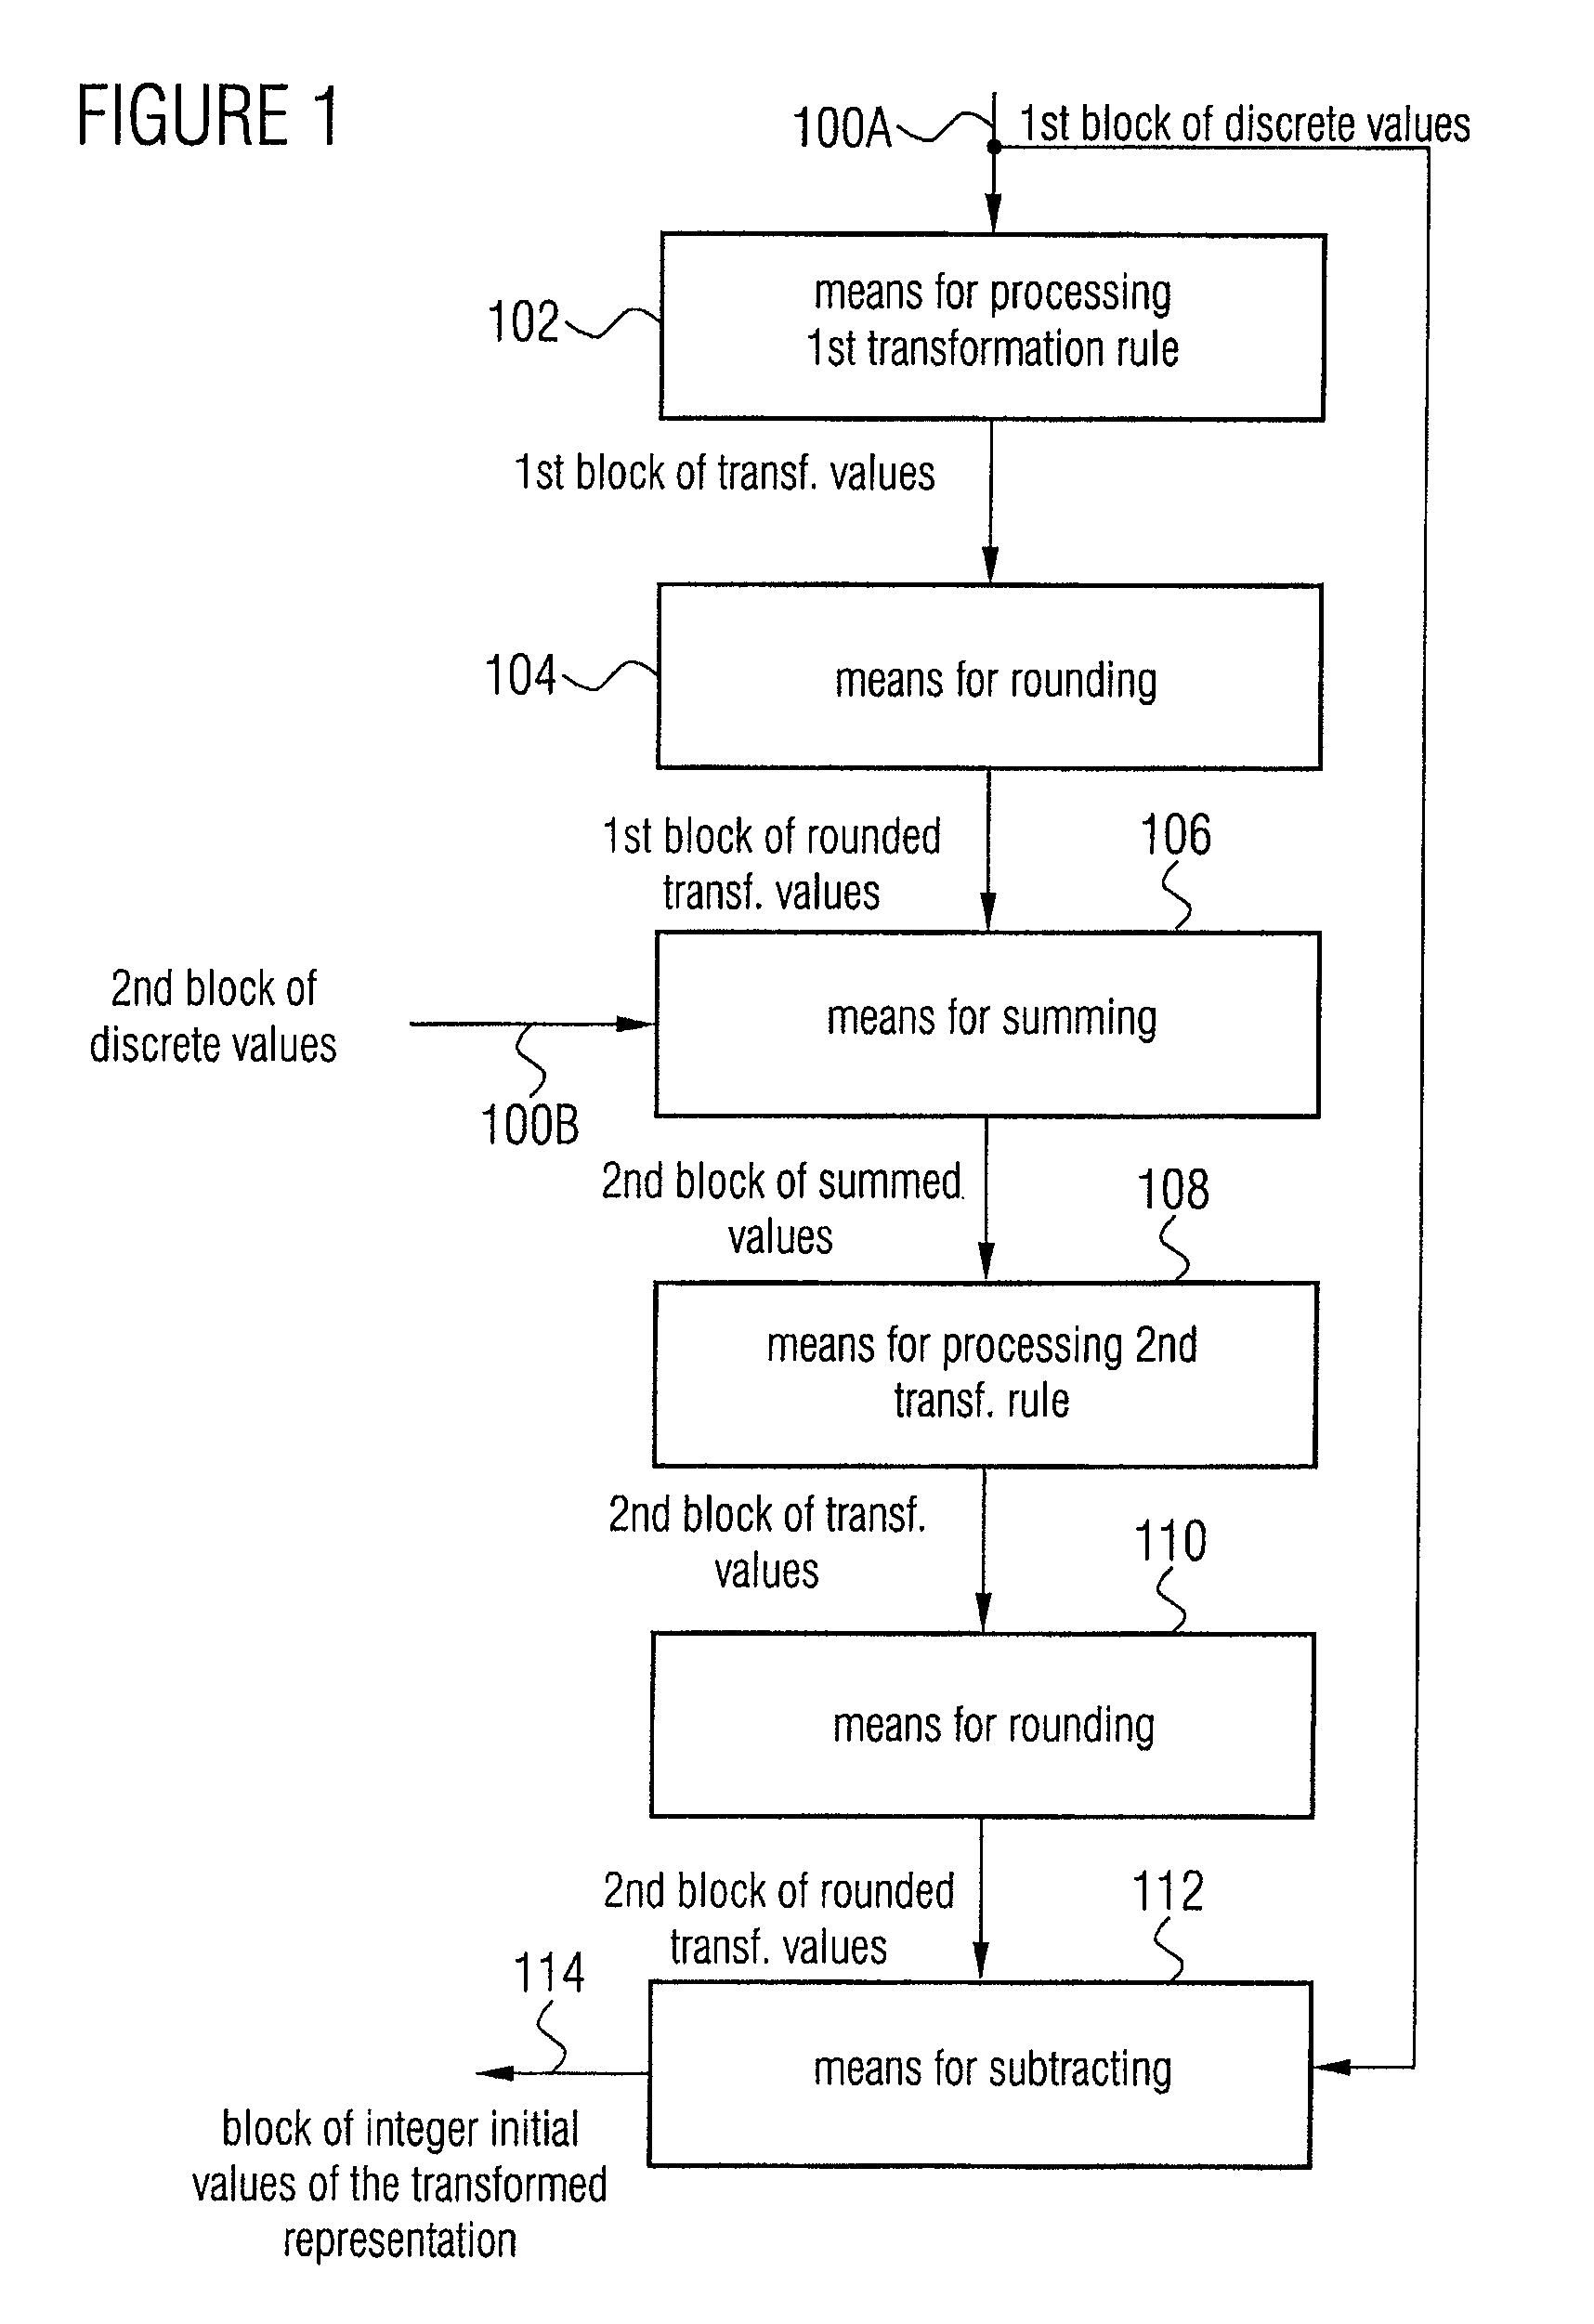 Apparatus and method for conversion into a transformed representation or for inverse conversion of the transformed representation